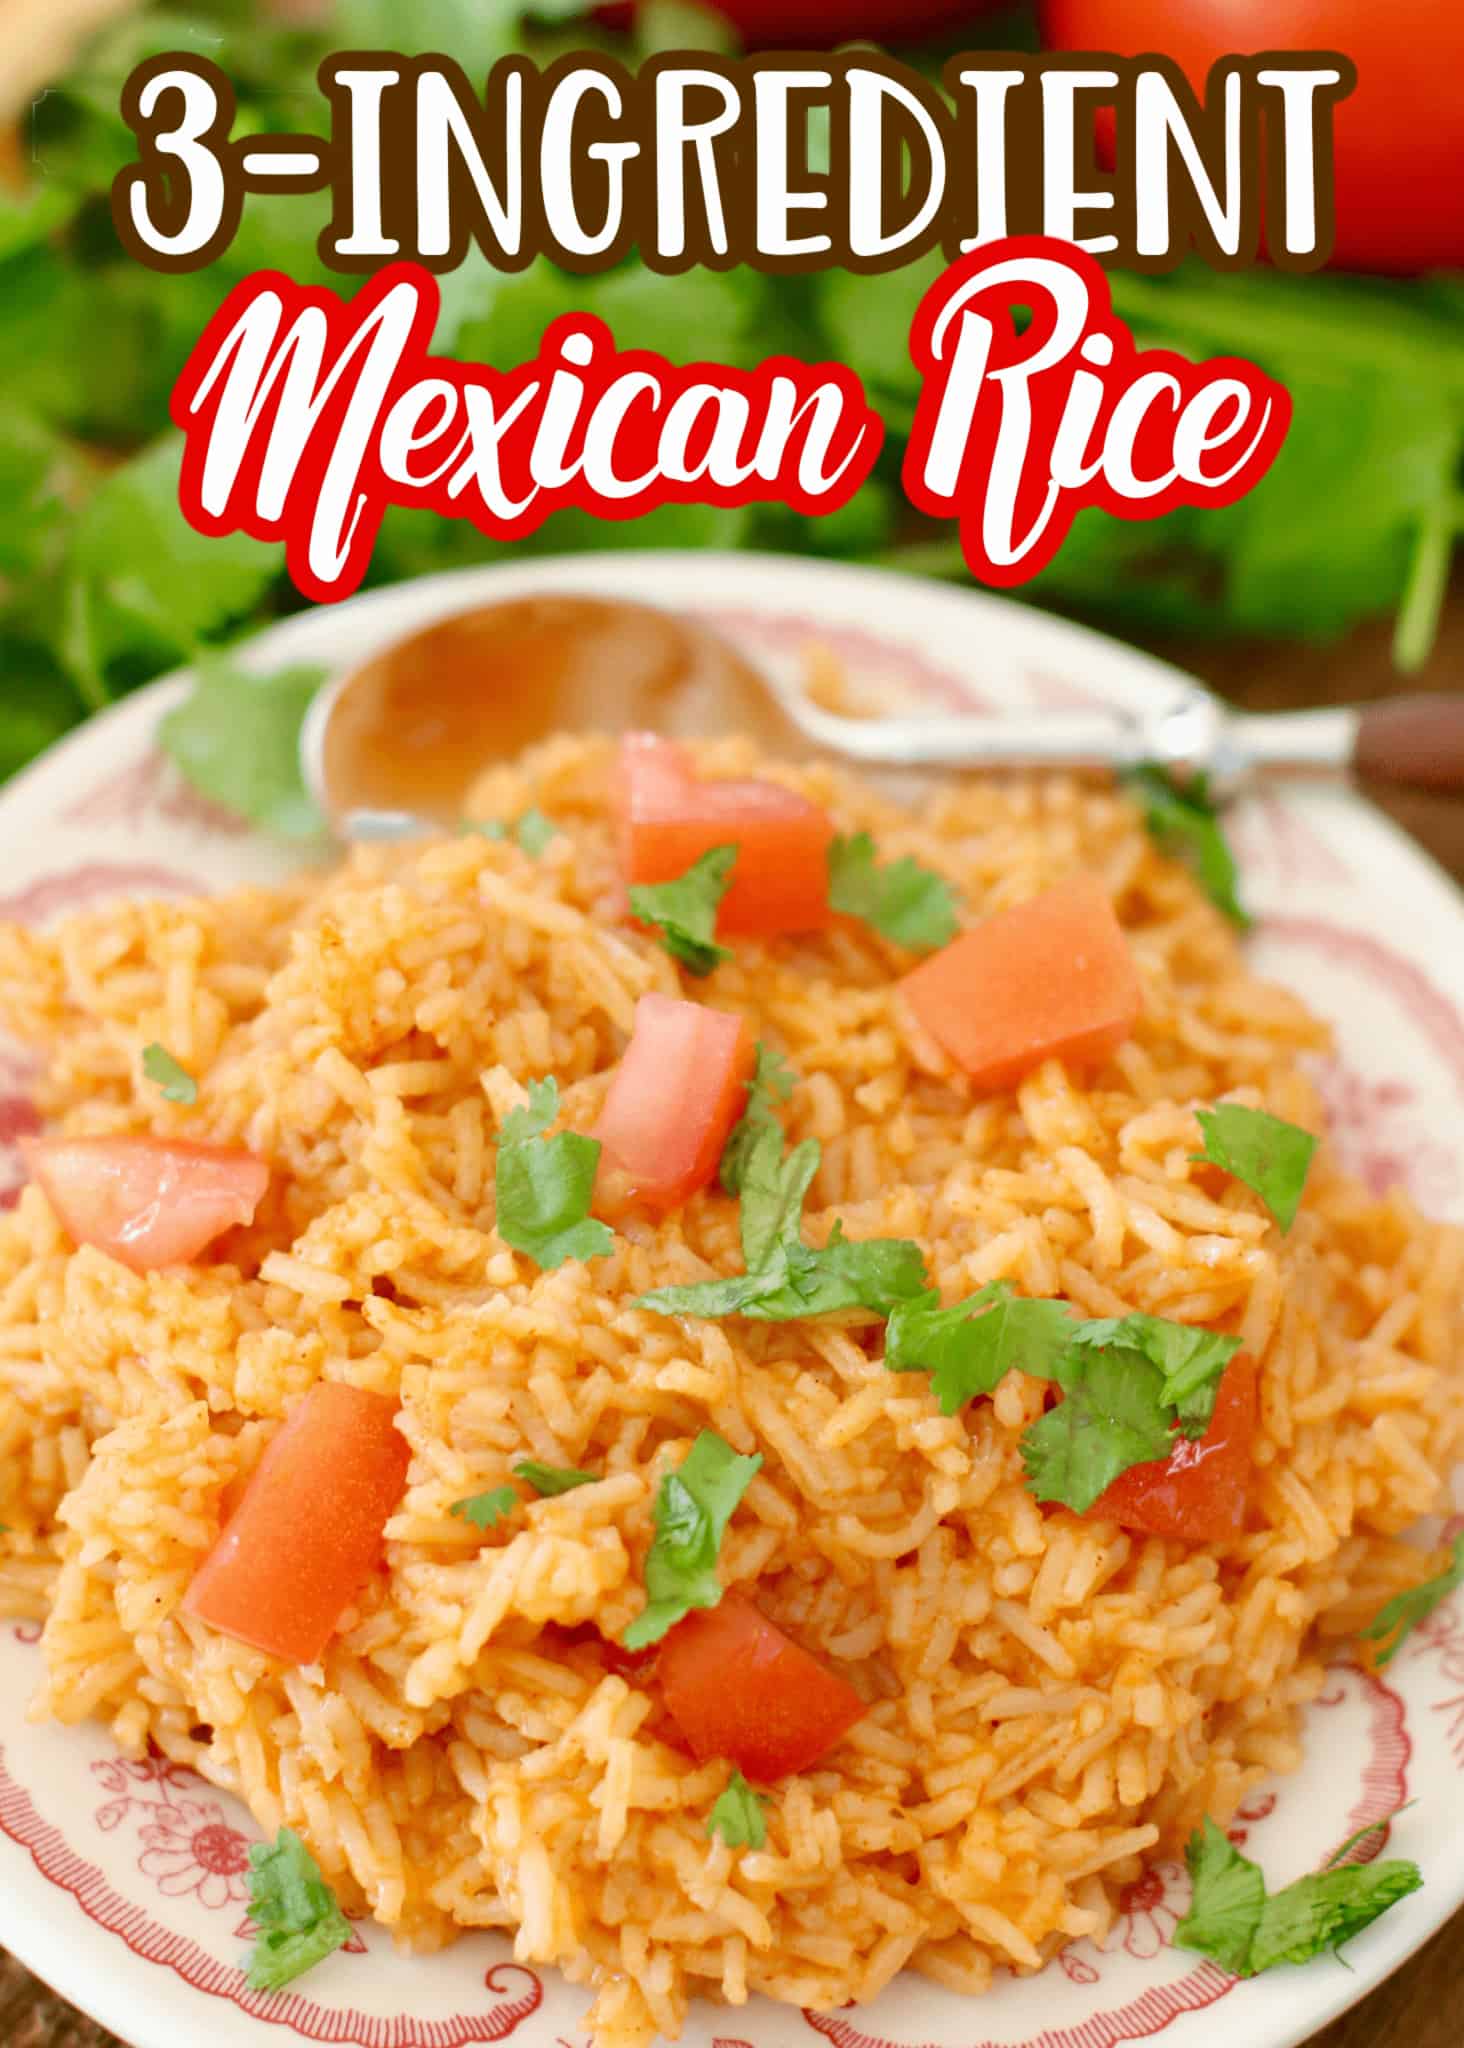 Mexican Restaurant Rice recipe from The Country Cook, rice shown on a round plate with a spoon in the background.